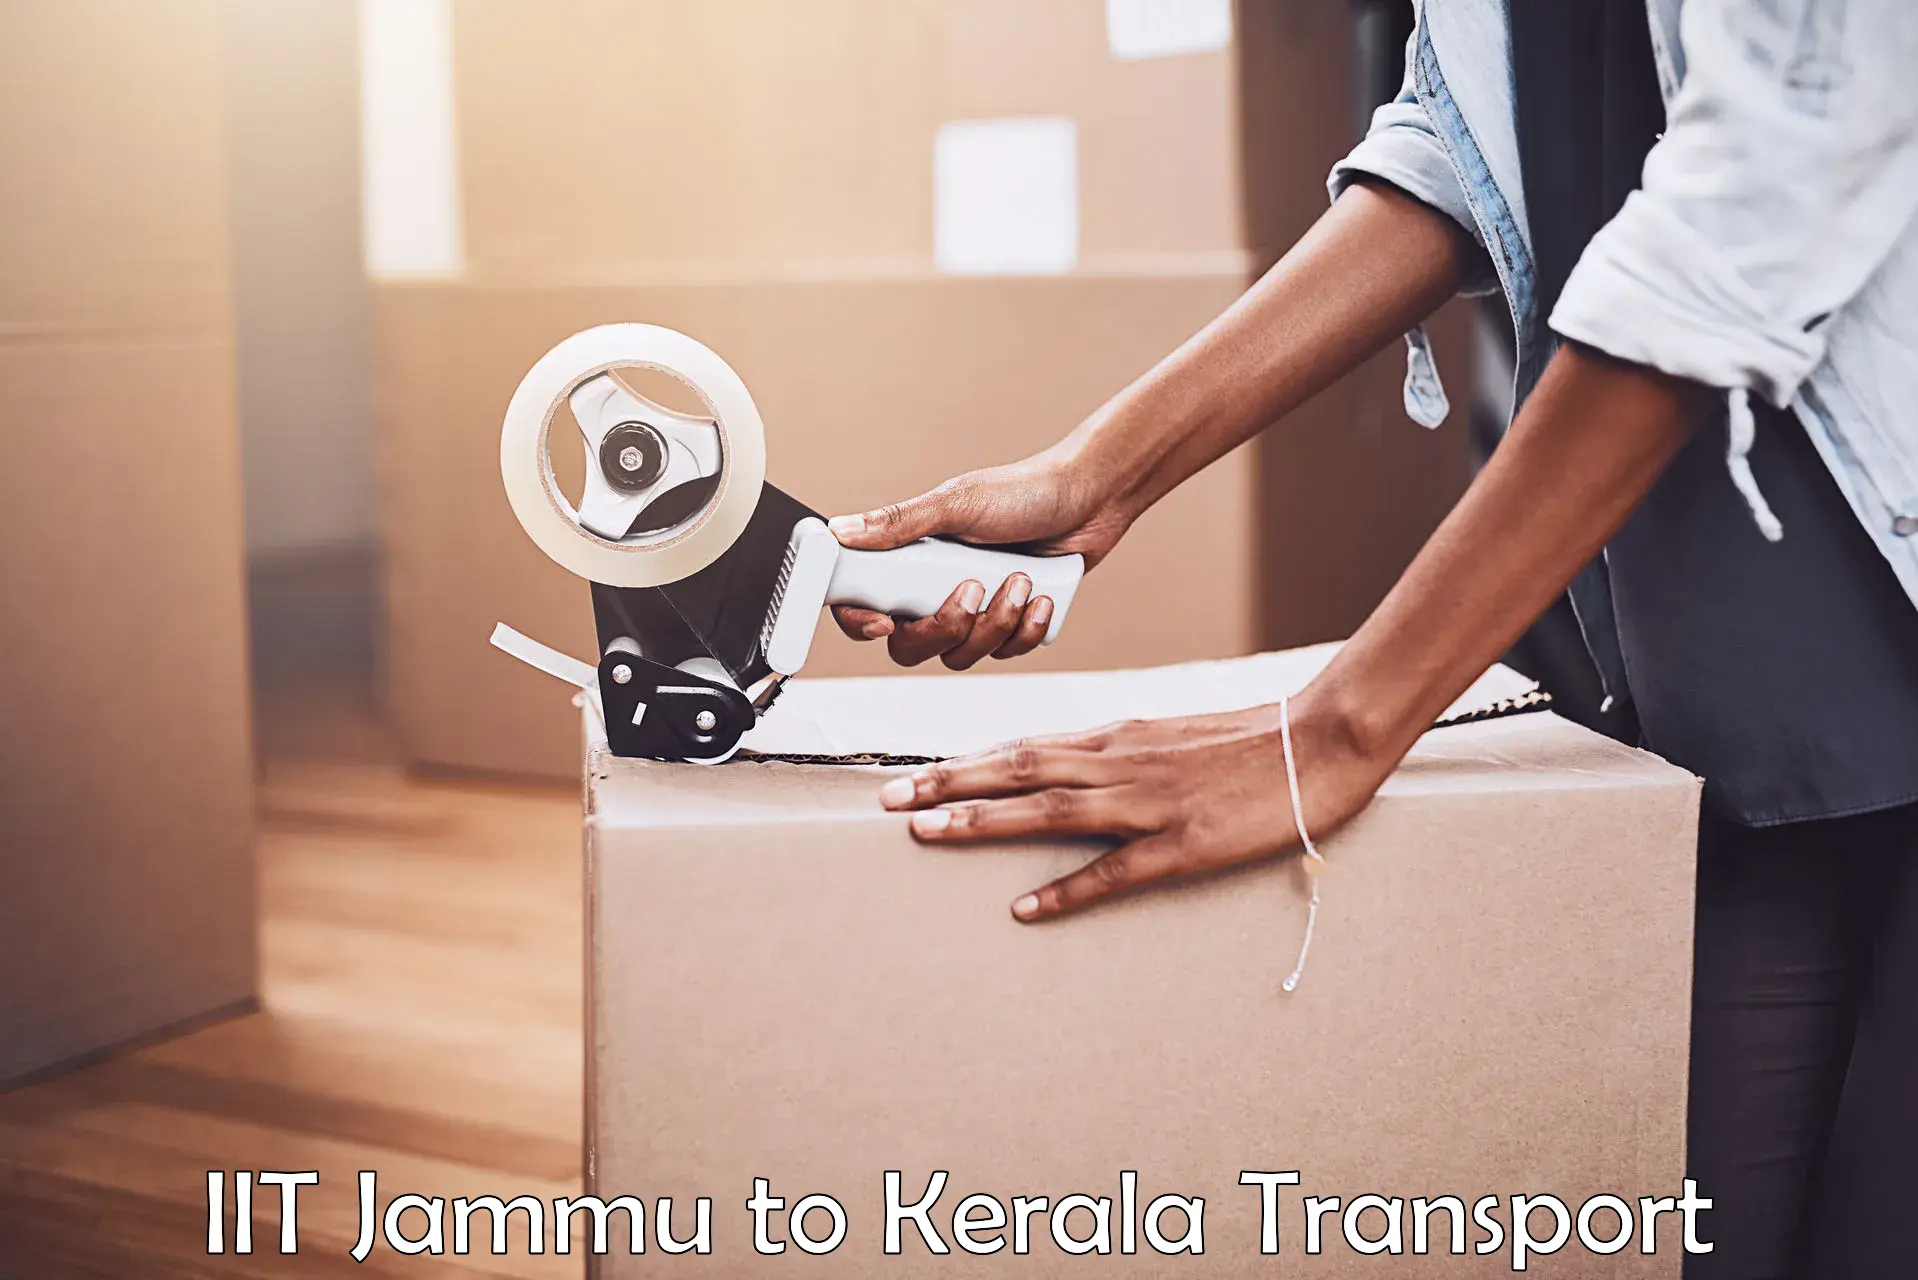 Delivery service IIT Jammu to Punalur